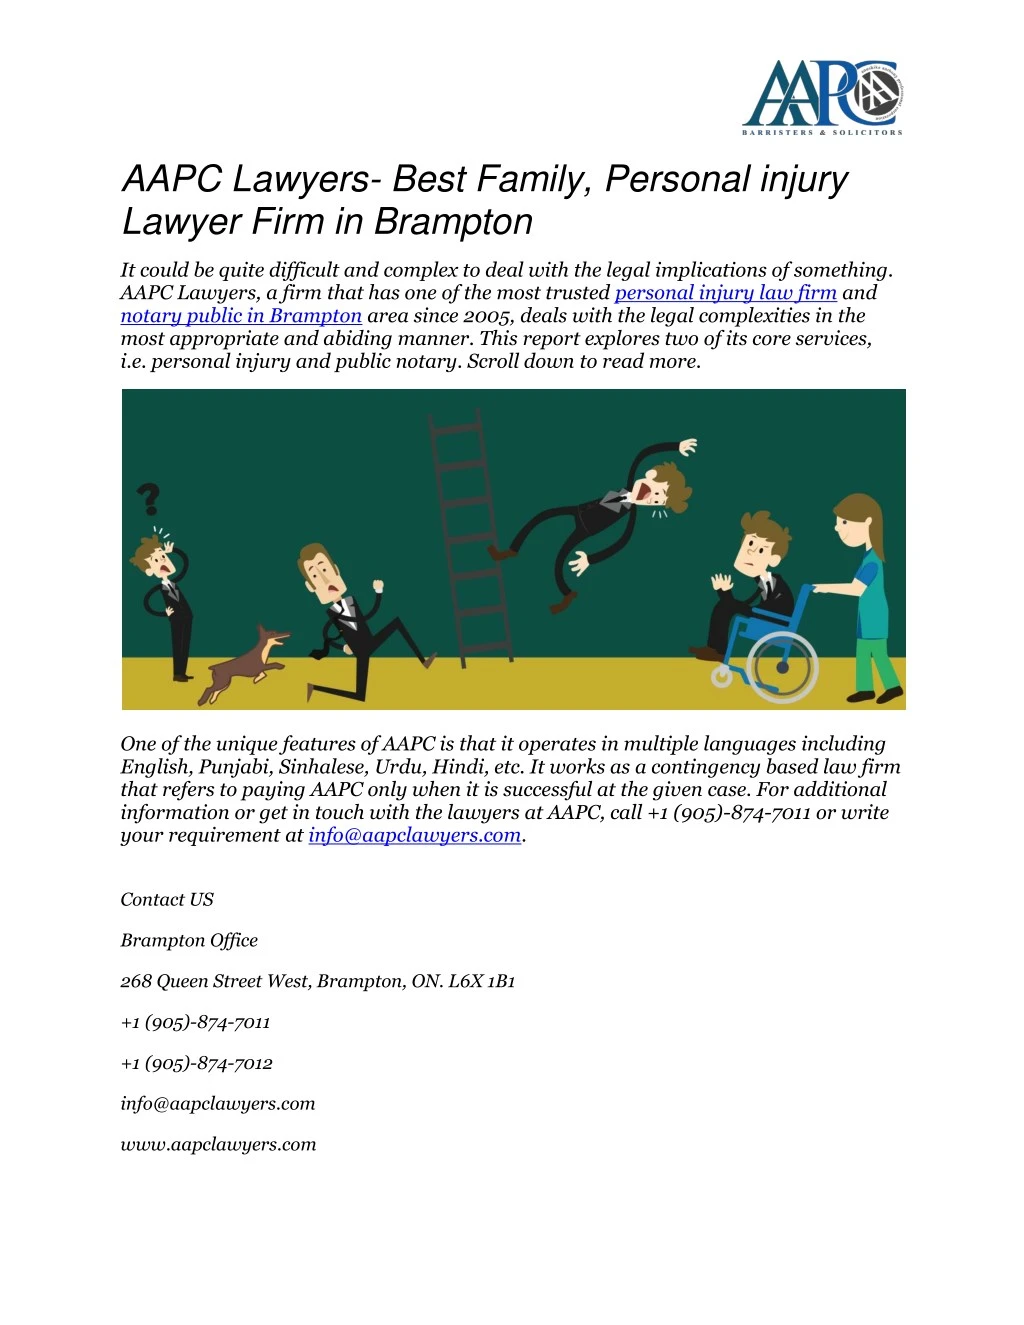 aapc lawyers best family personal injury lawyer